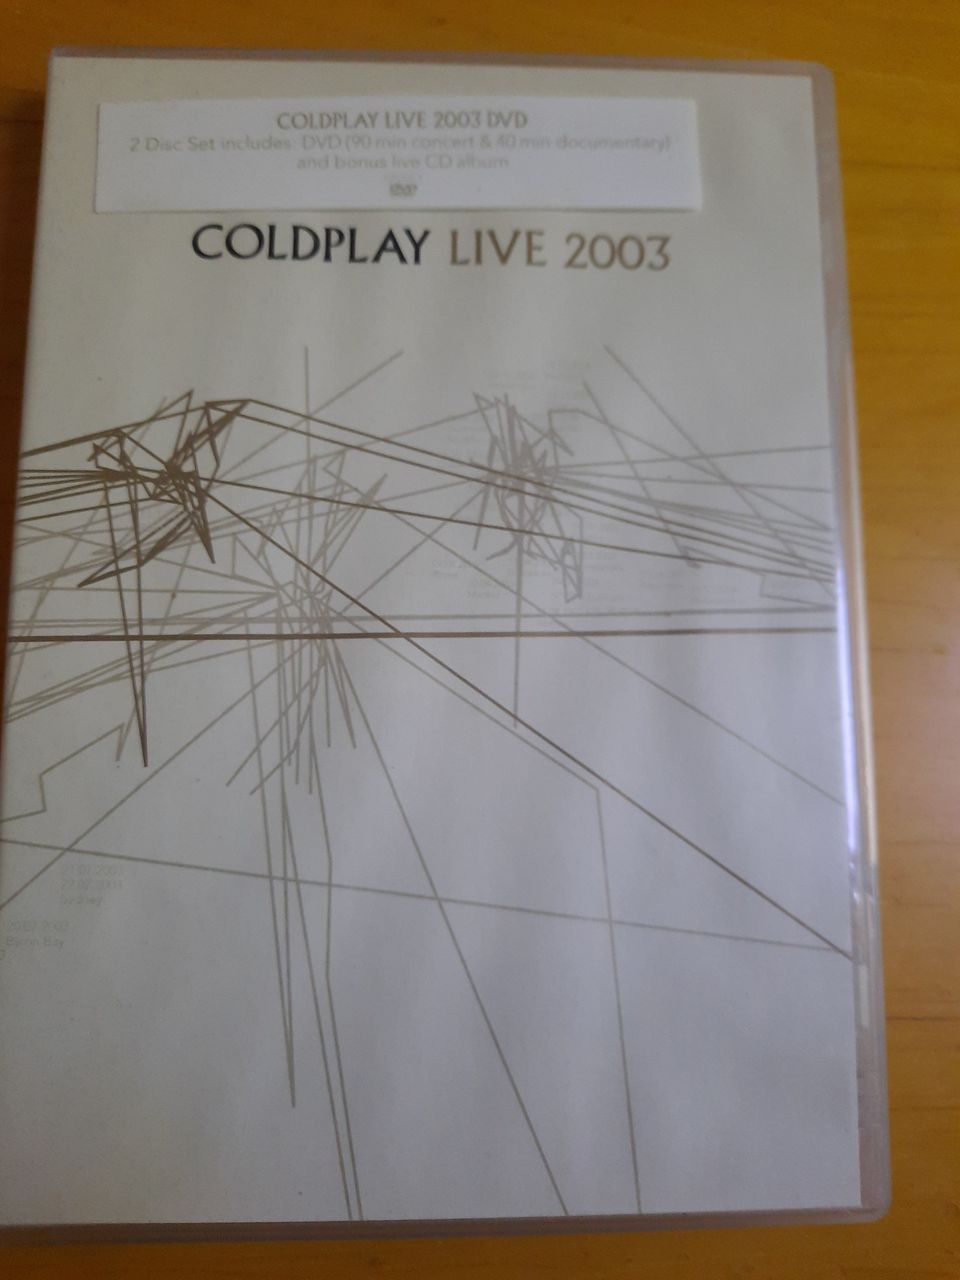 Coldplay live 2003 dvd